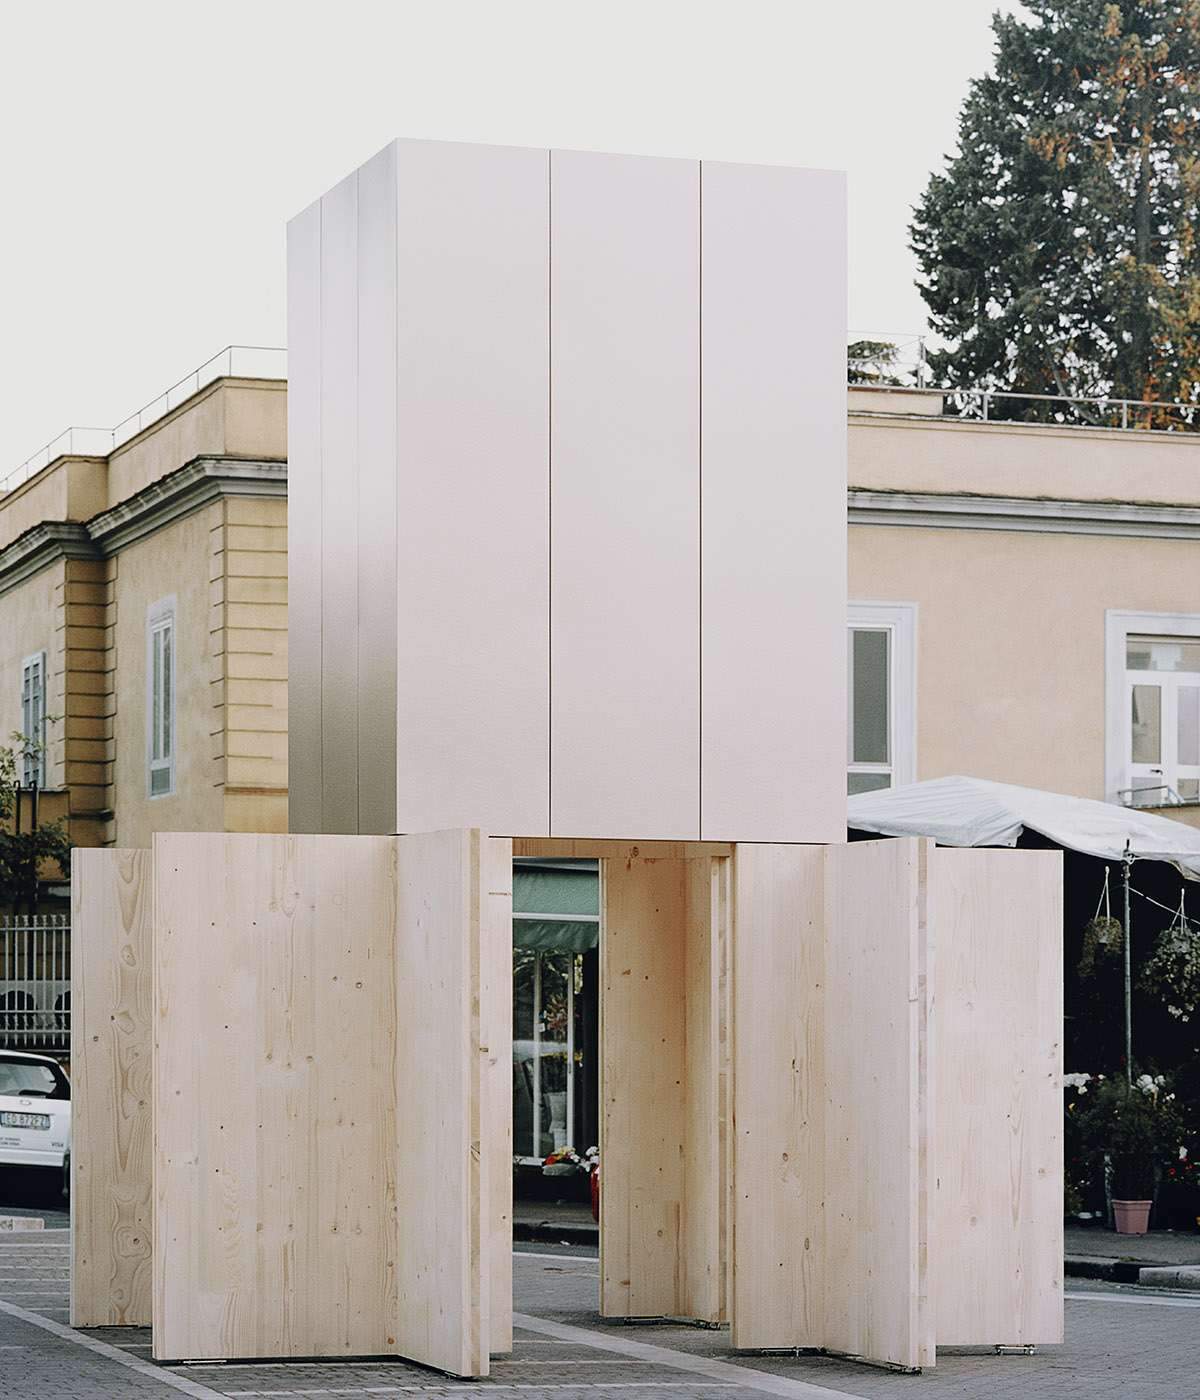 Site-specific pop-up pavilion installed for Rome Architecture Festival